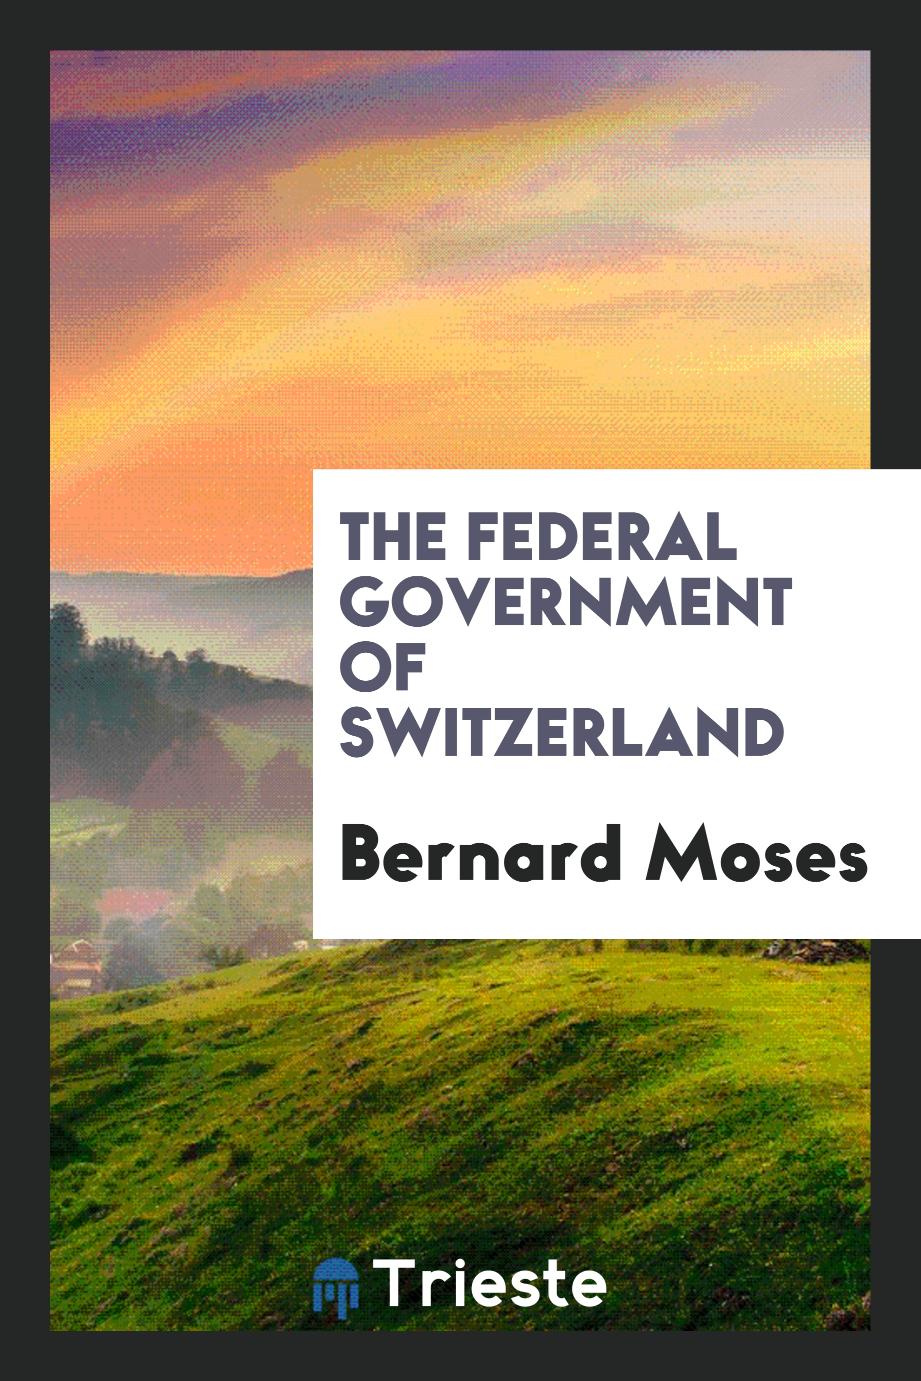 The federal government of Switzerland